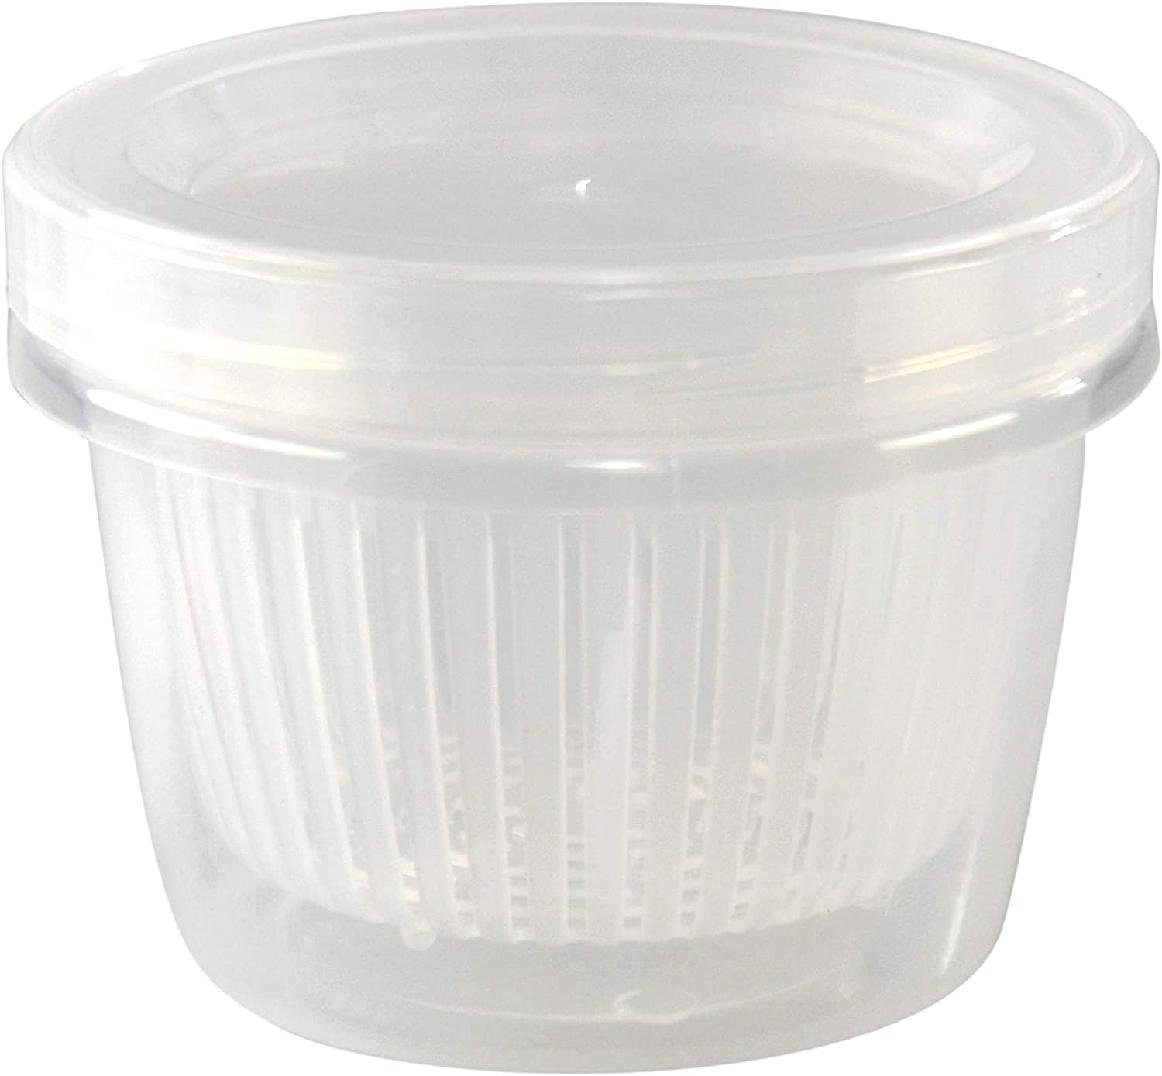 Prep & Savour 8 x 8 x 3 Square Seal Hinged-Lid Clear Plastic Disposable  Containers